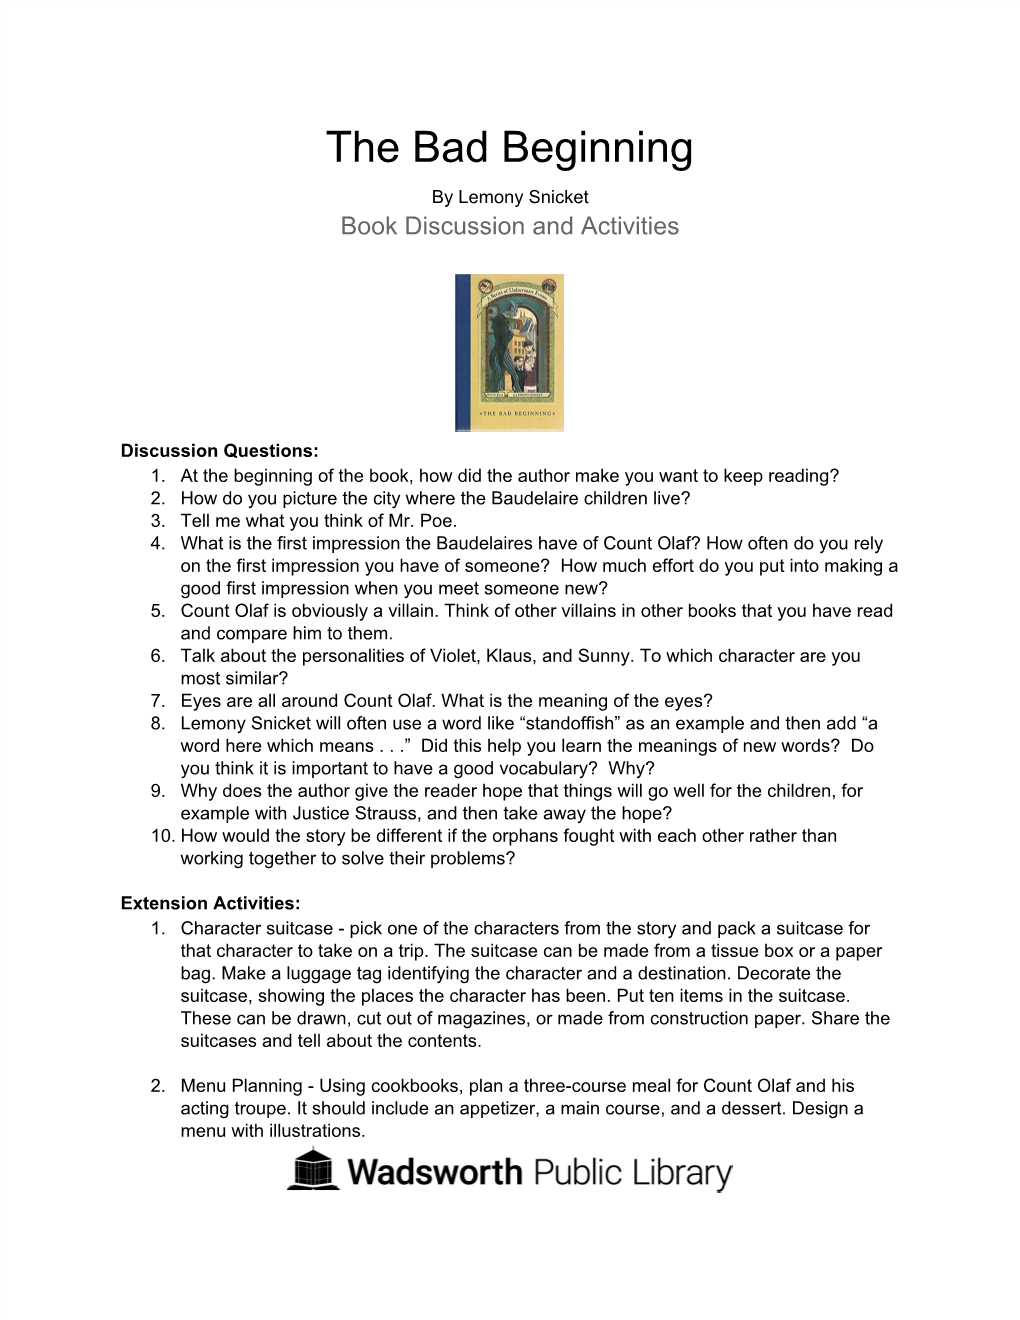 The Bad Beginning by Lemony Snicket Book Discussion and Activities